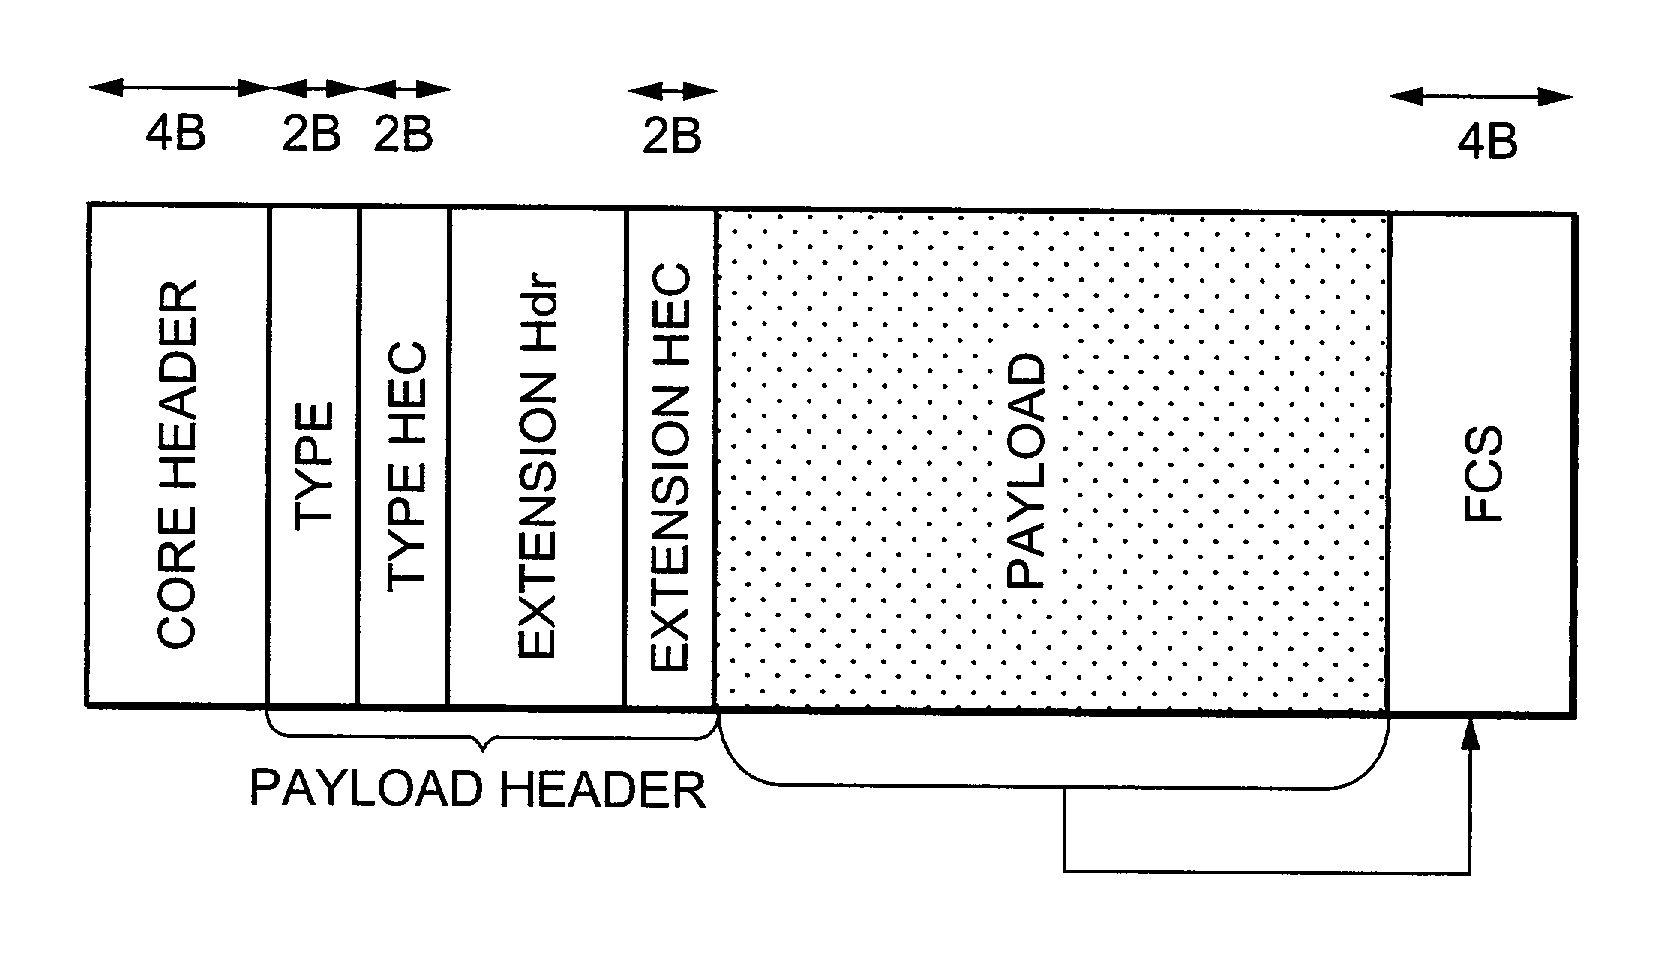 Apparatus and method for GFP frame transfer